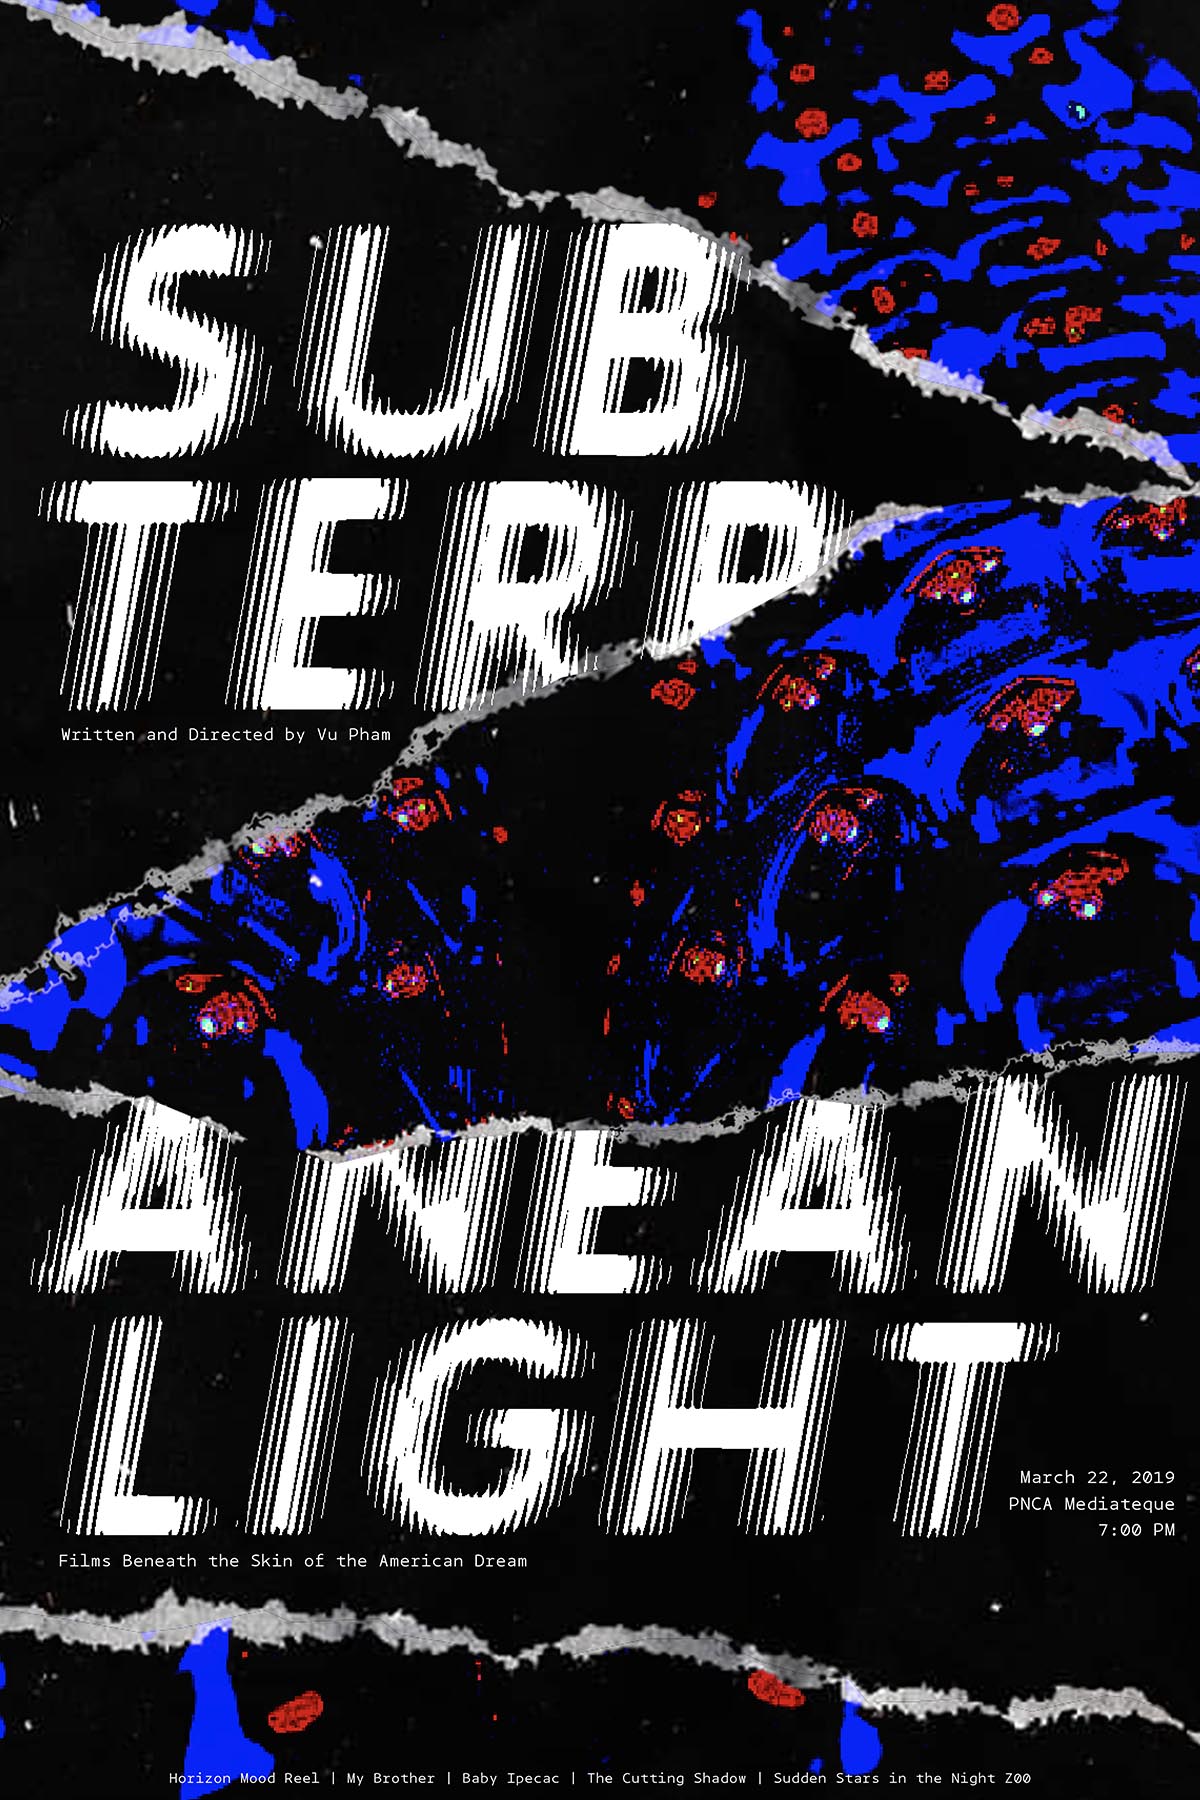 Blue and red painterly image is collaged with torn paper edges into black and white, digital, retro looking poster design. Reads, 'Subterranean Light'  in big type. Small text details the film showing at PNCA Mediatheque.